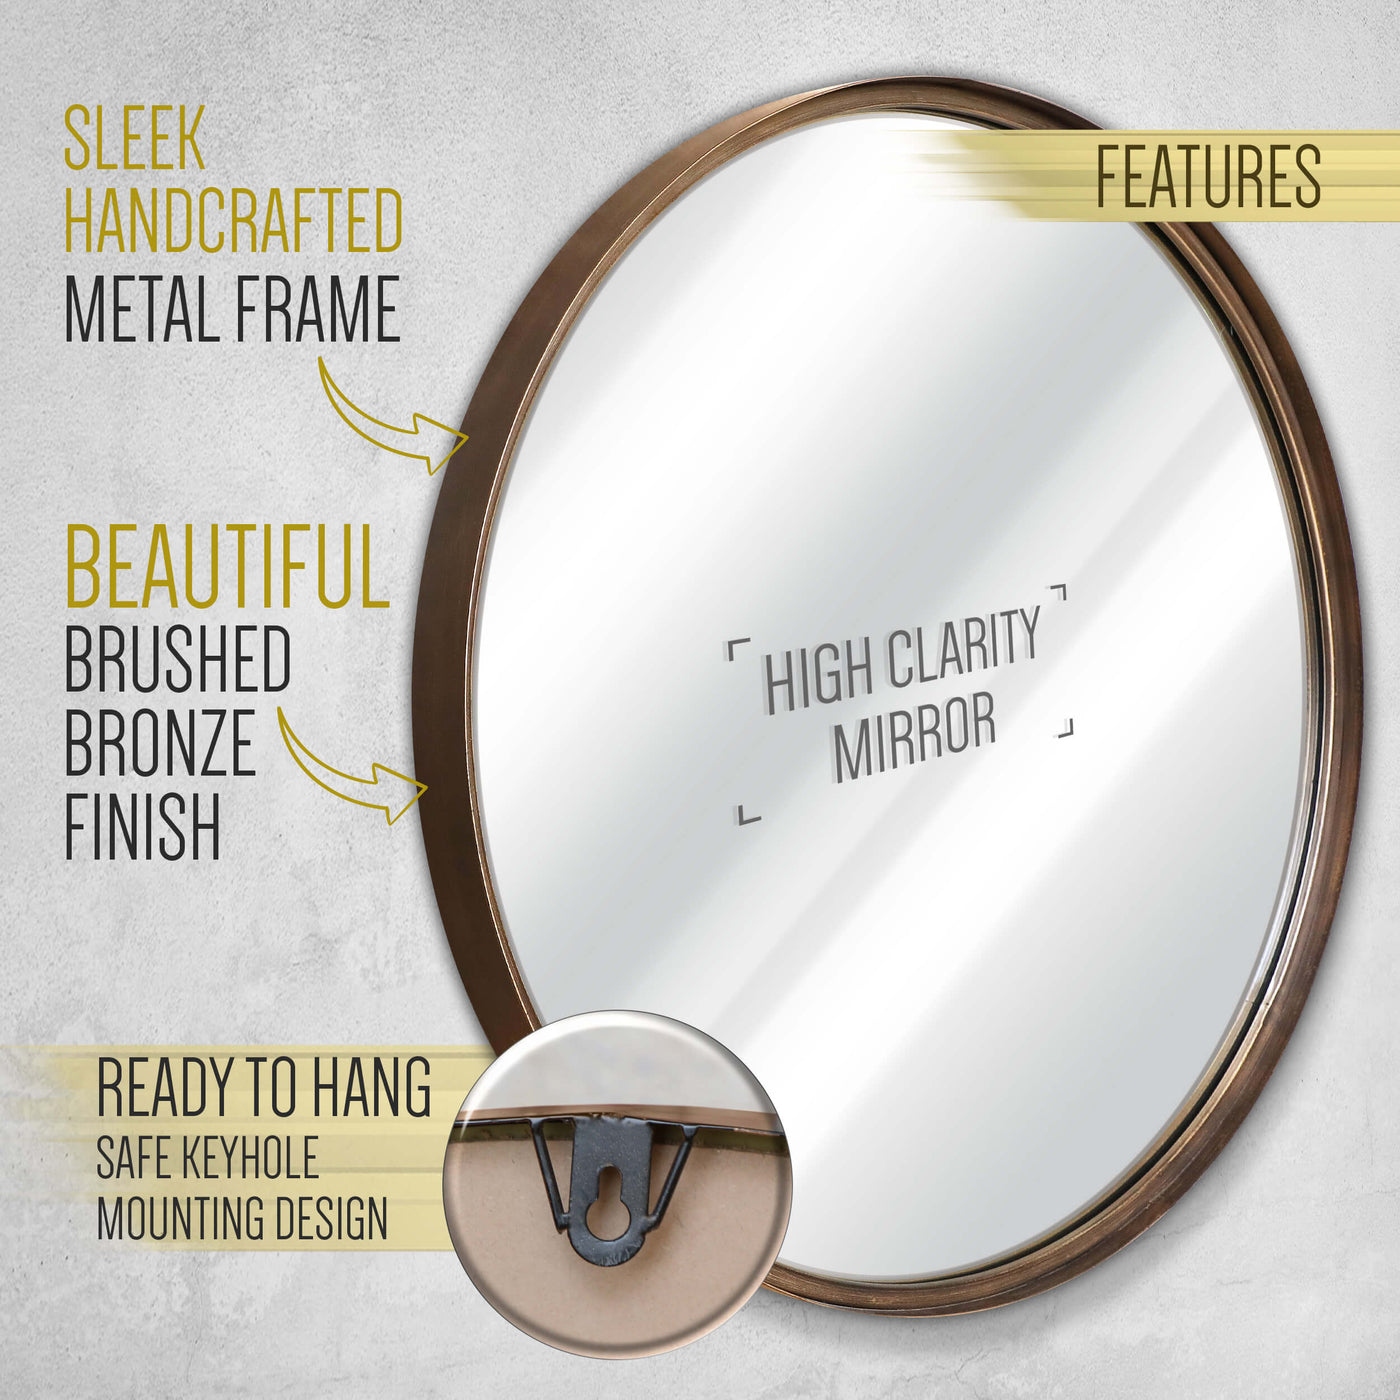 27.5" Round Wall Mirror for Bathrooms, Entryways and Living Rooms